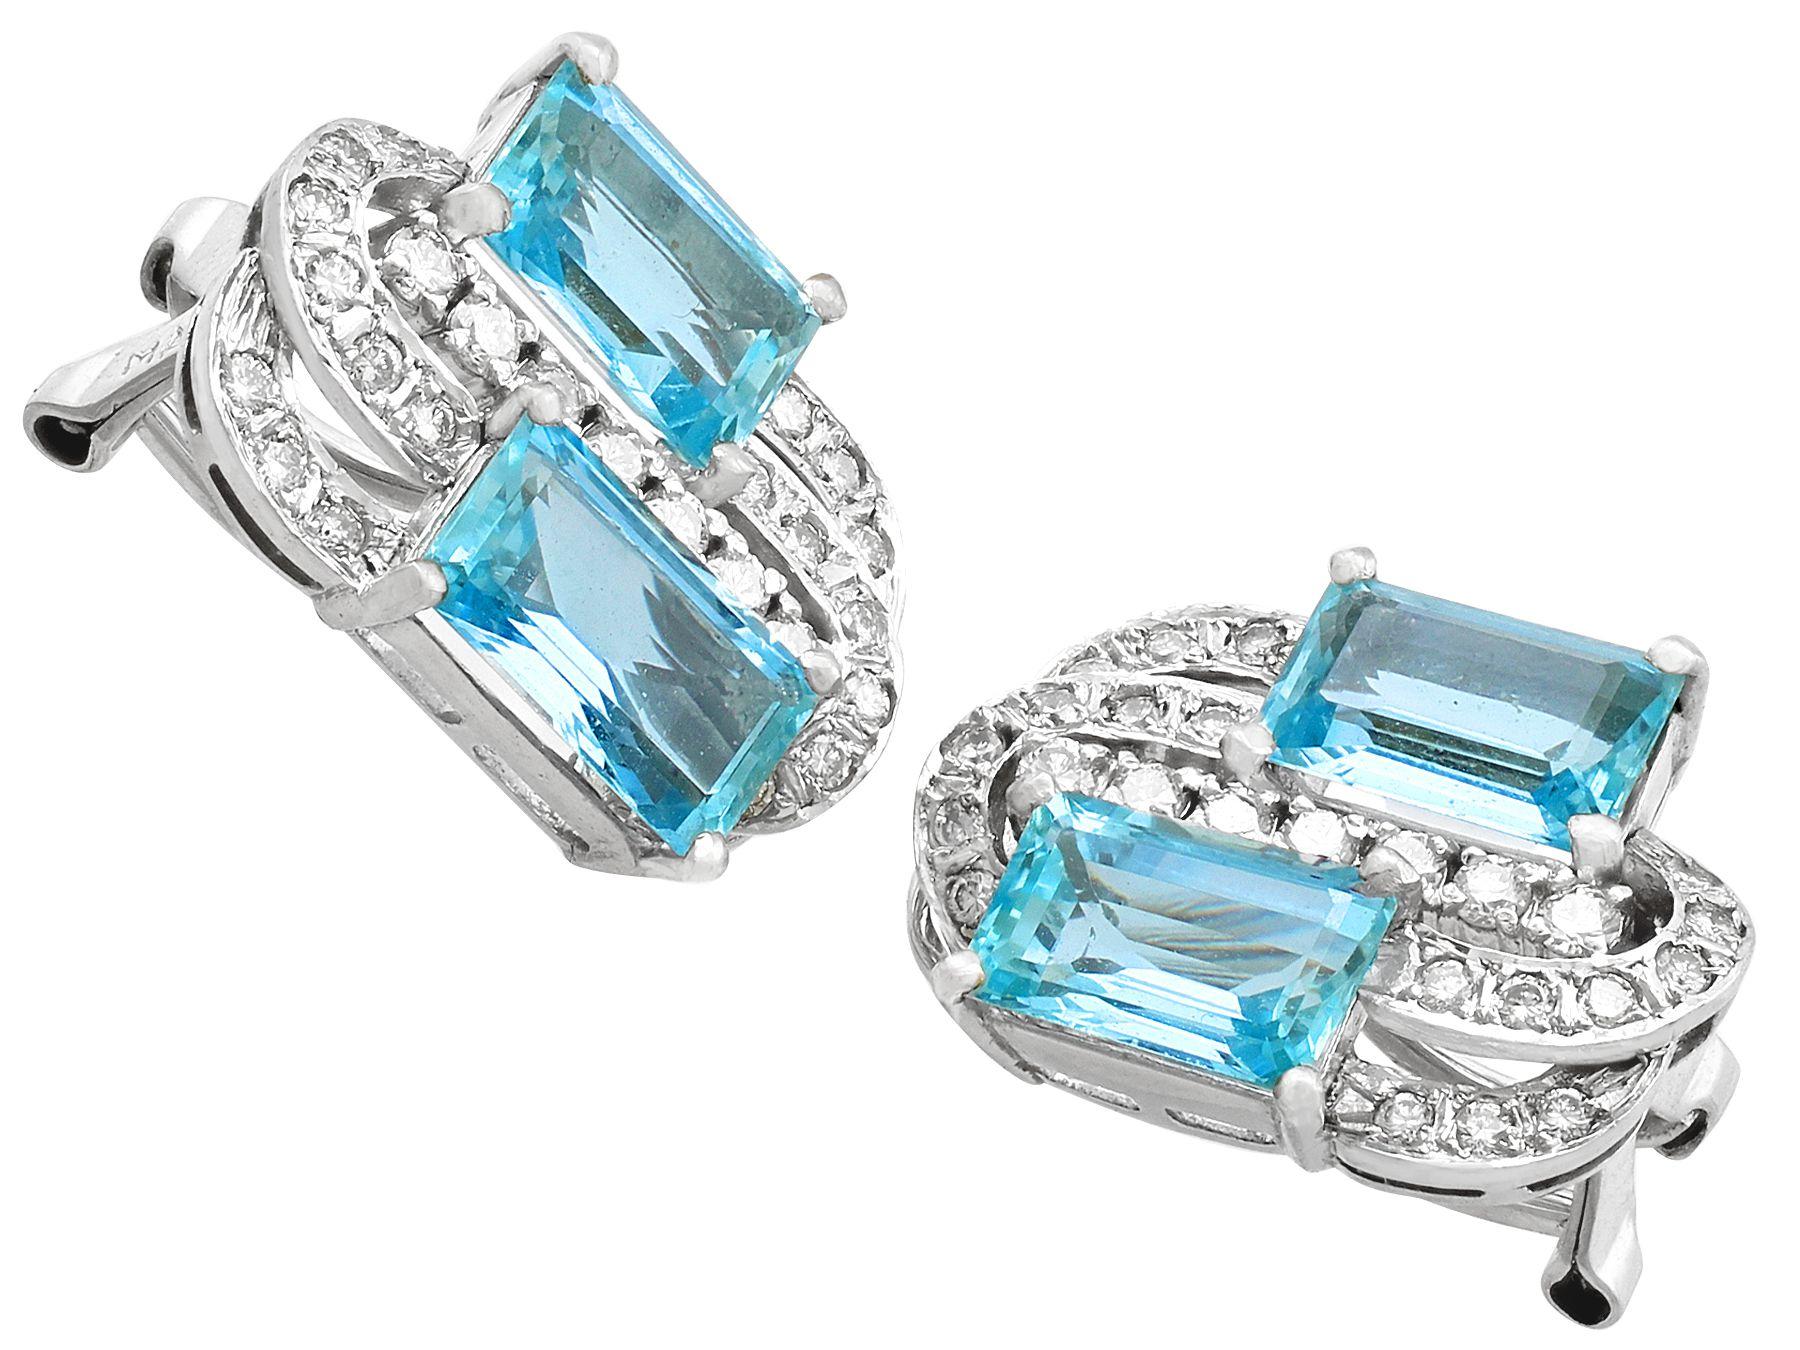 Vintage 7.72 Carat Aquamarine and 1.18 Carat Diamond White Gold Earrings In Excellent Condition For Sale In Jesmond, Newcastle Upon Tyne